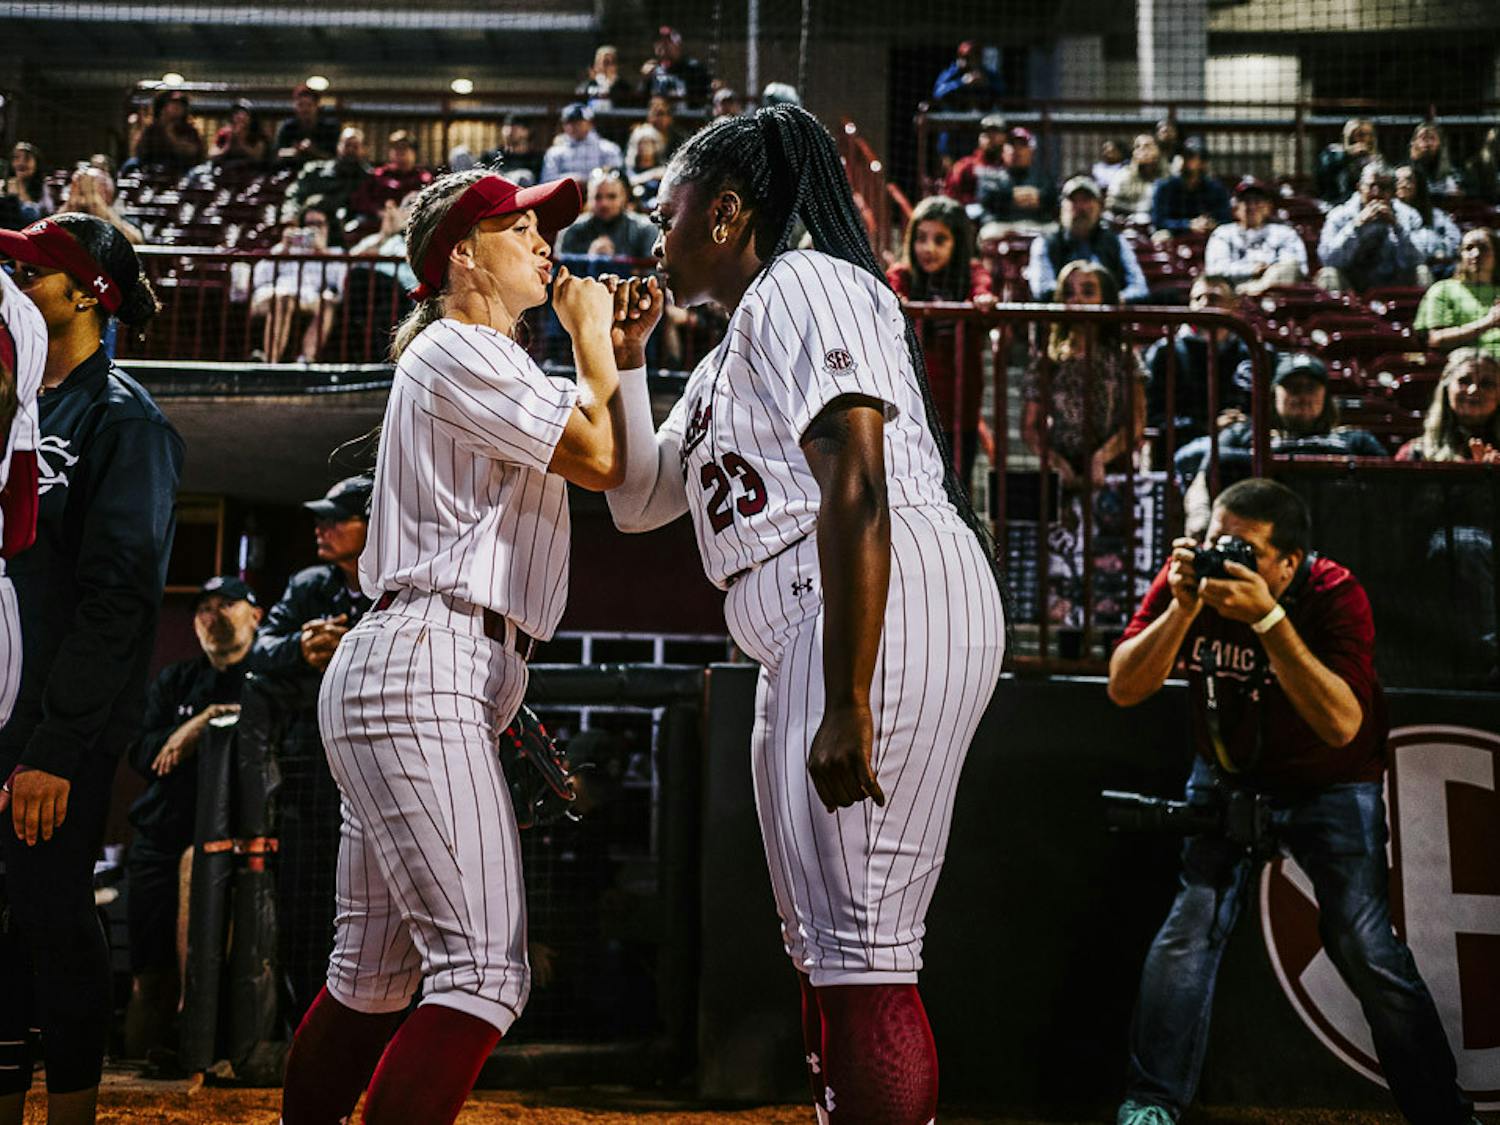 Sophomore infielder Brooke Blankenship (on left) and senior pitcher Donnie Gobourne (on right) celebrate with each other during player introductions at the South Carolina vs. College of Charleston game on February 15, 2023. The Gamecocks beat the Cougars 8-0.&nbsp;